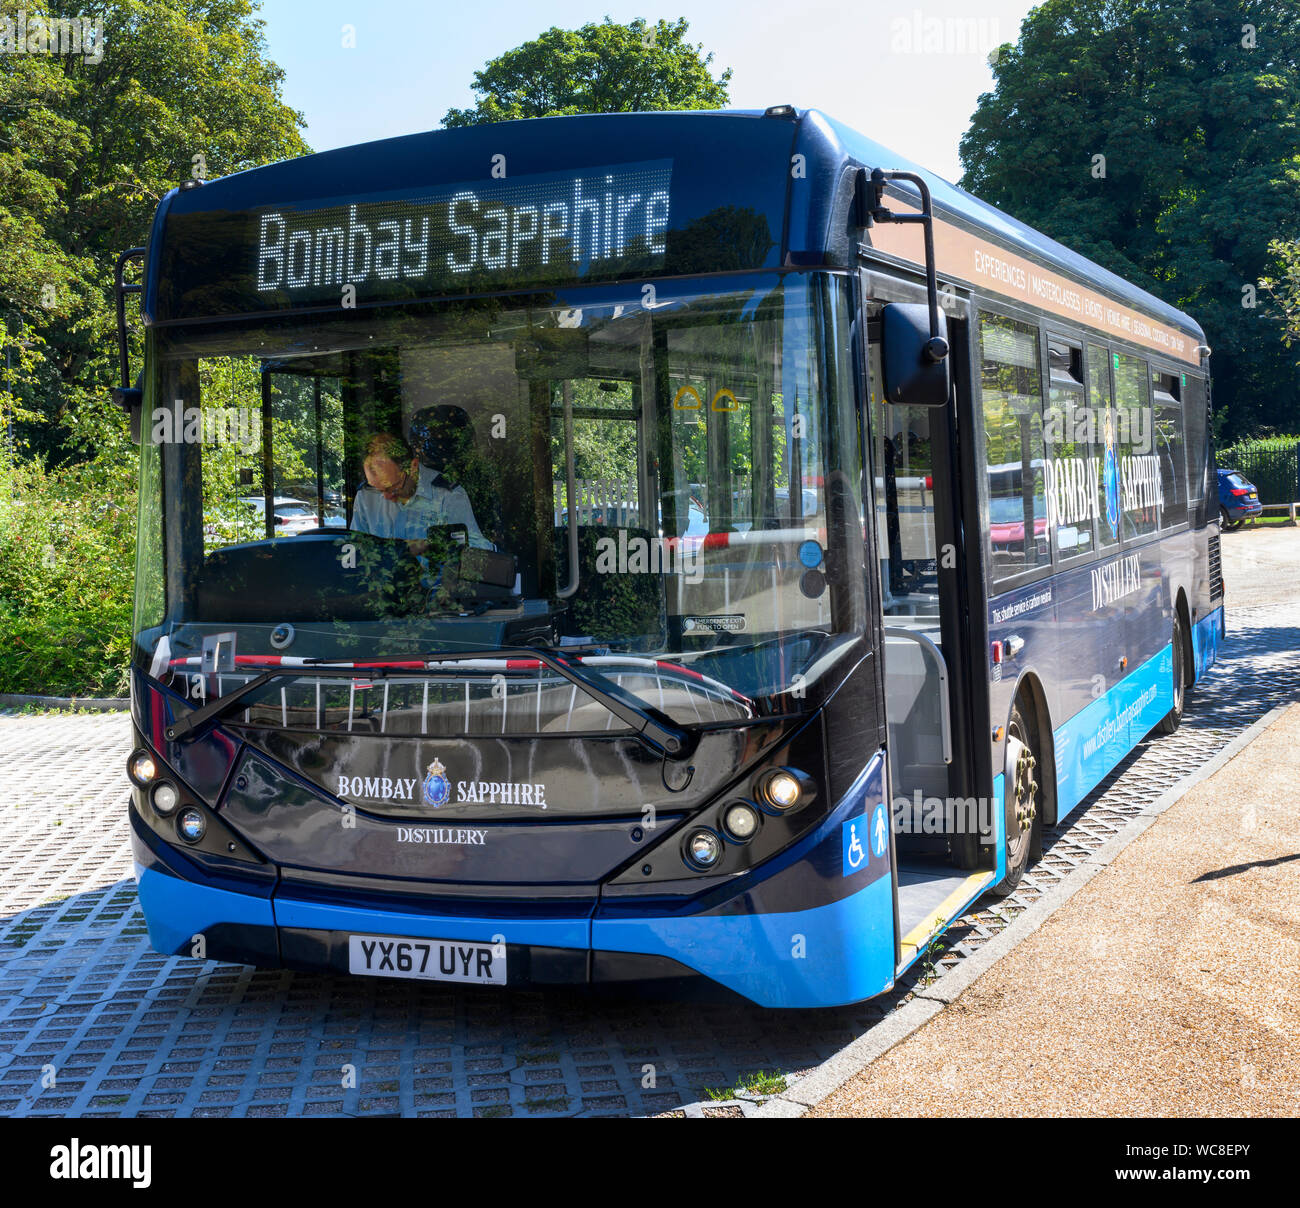 Single decker bus used by Bombay Sapphire Distillery to transport tourist and visitors to their Gin Distillery at Laverstoke, Hampshire, England, UK Stock Photo